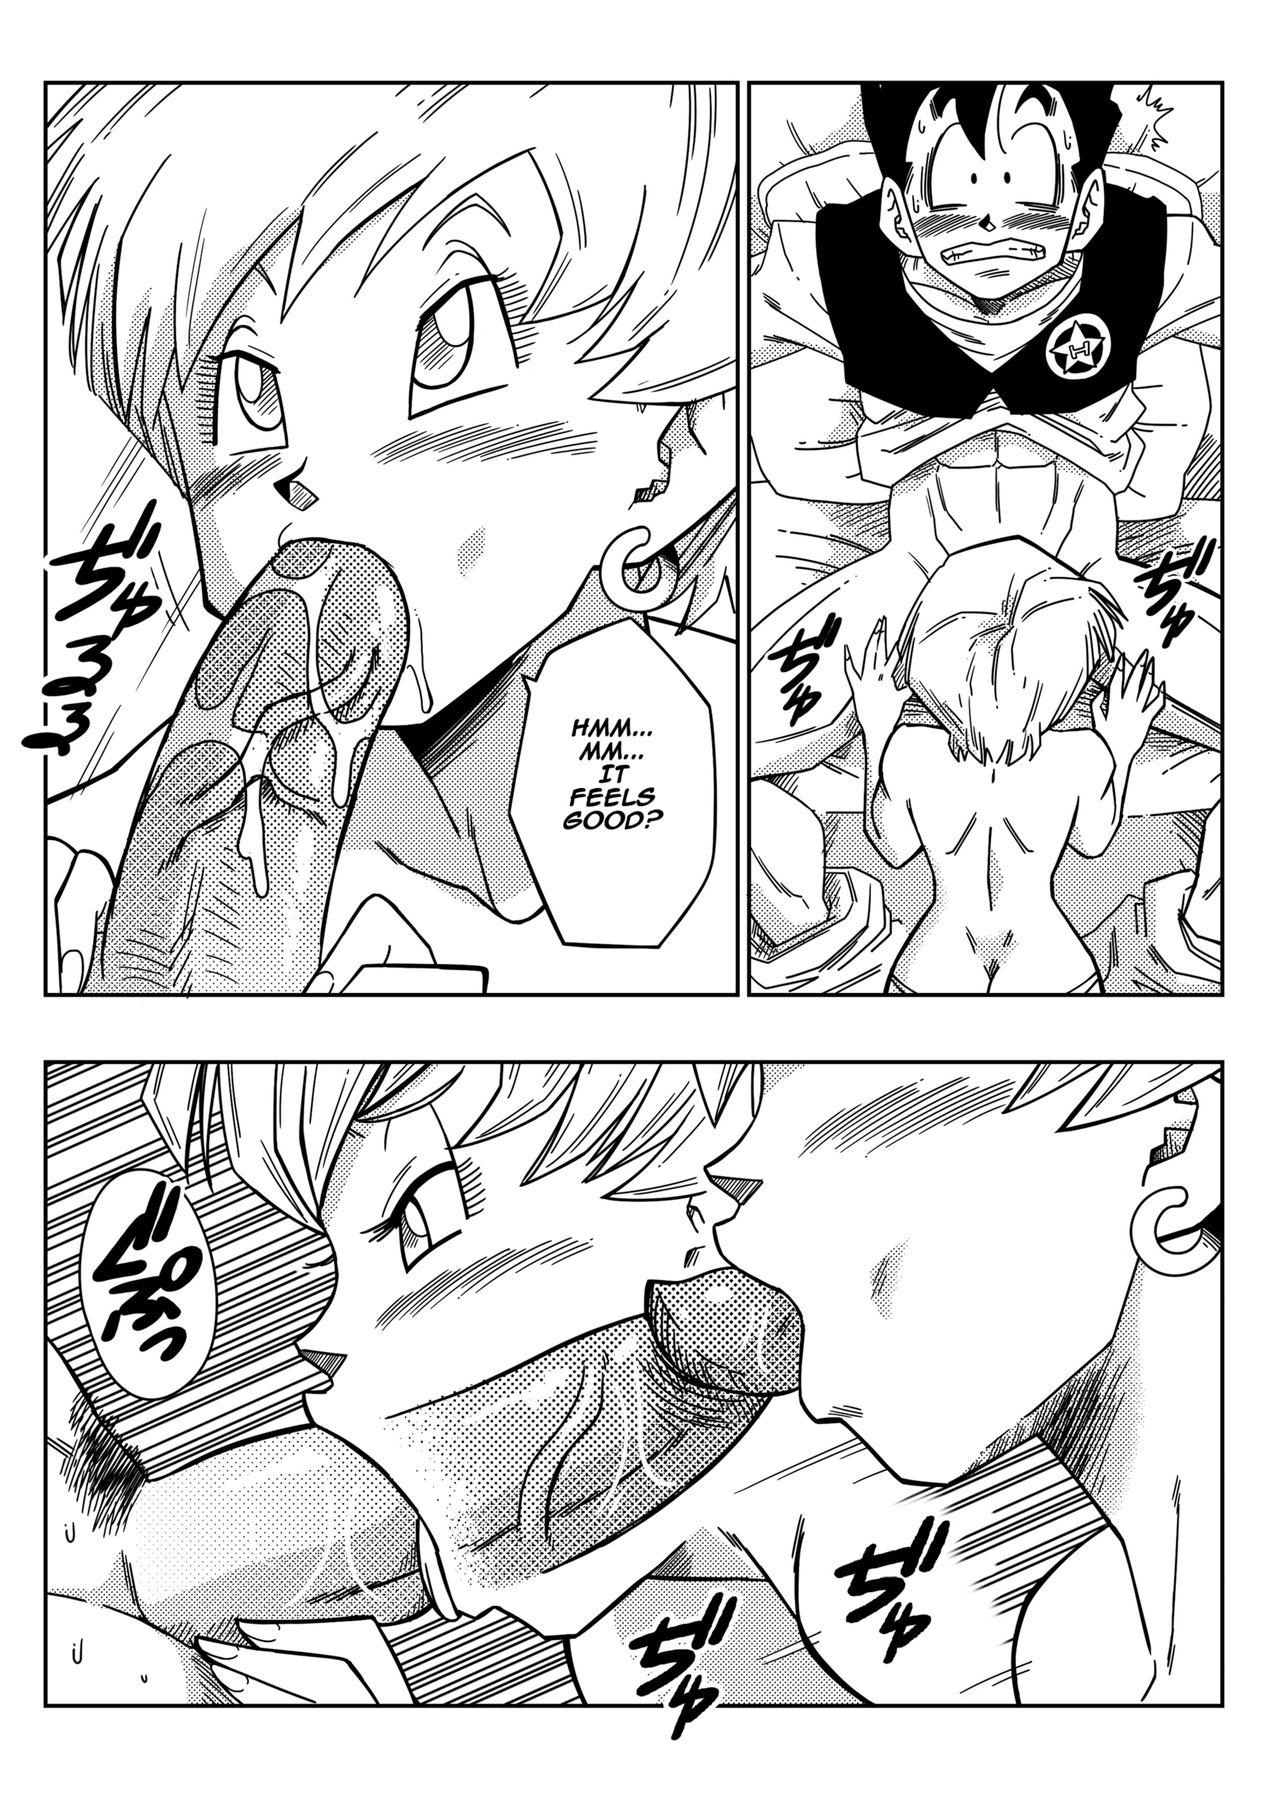 Urine LOVE TRIANGLE Z PART 1 - Gohan Meets Erasa "Let's Make A Lot Of Sex, OK? - Dragon ball z Cowgirl - Page 10